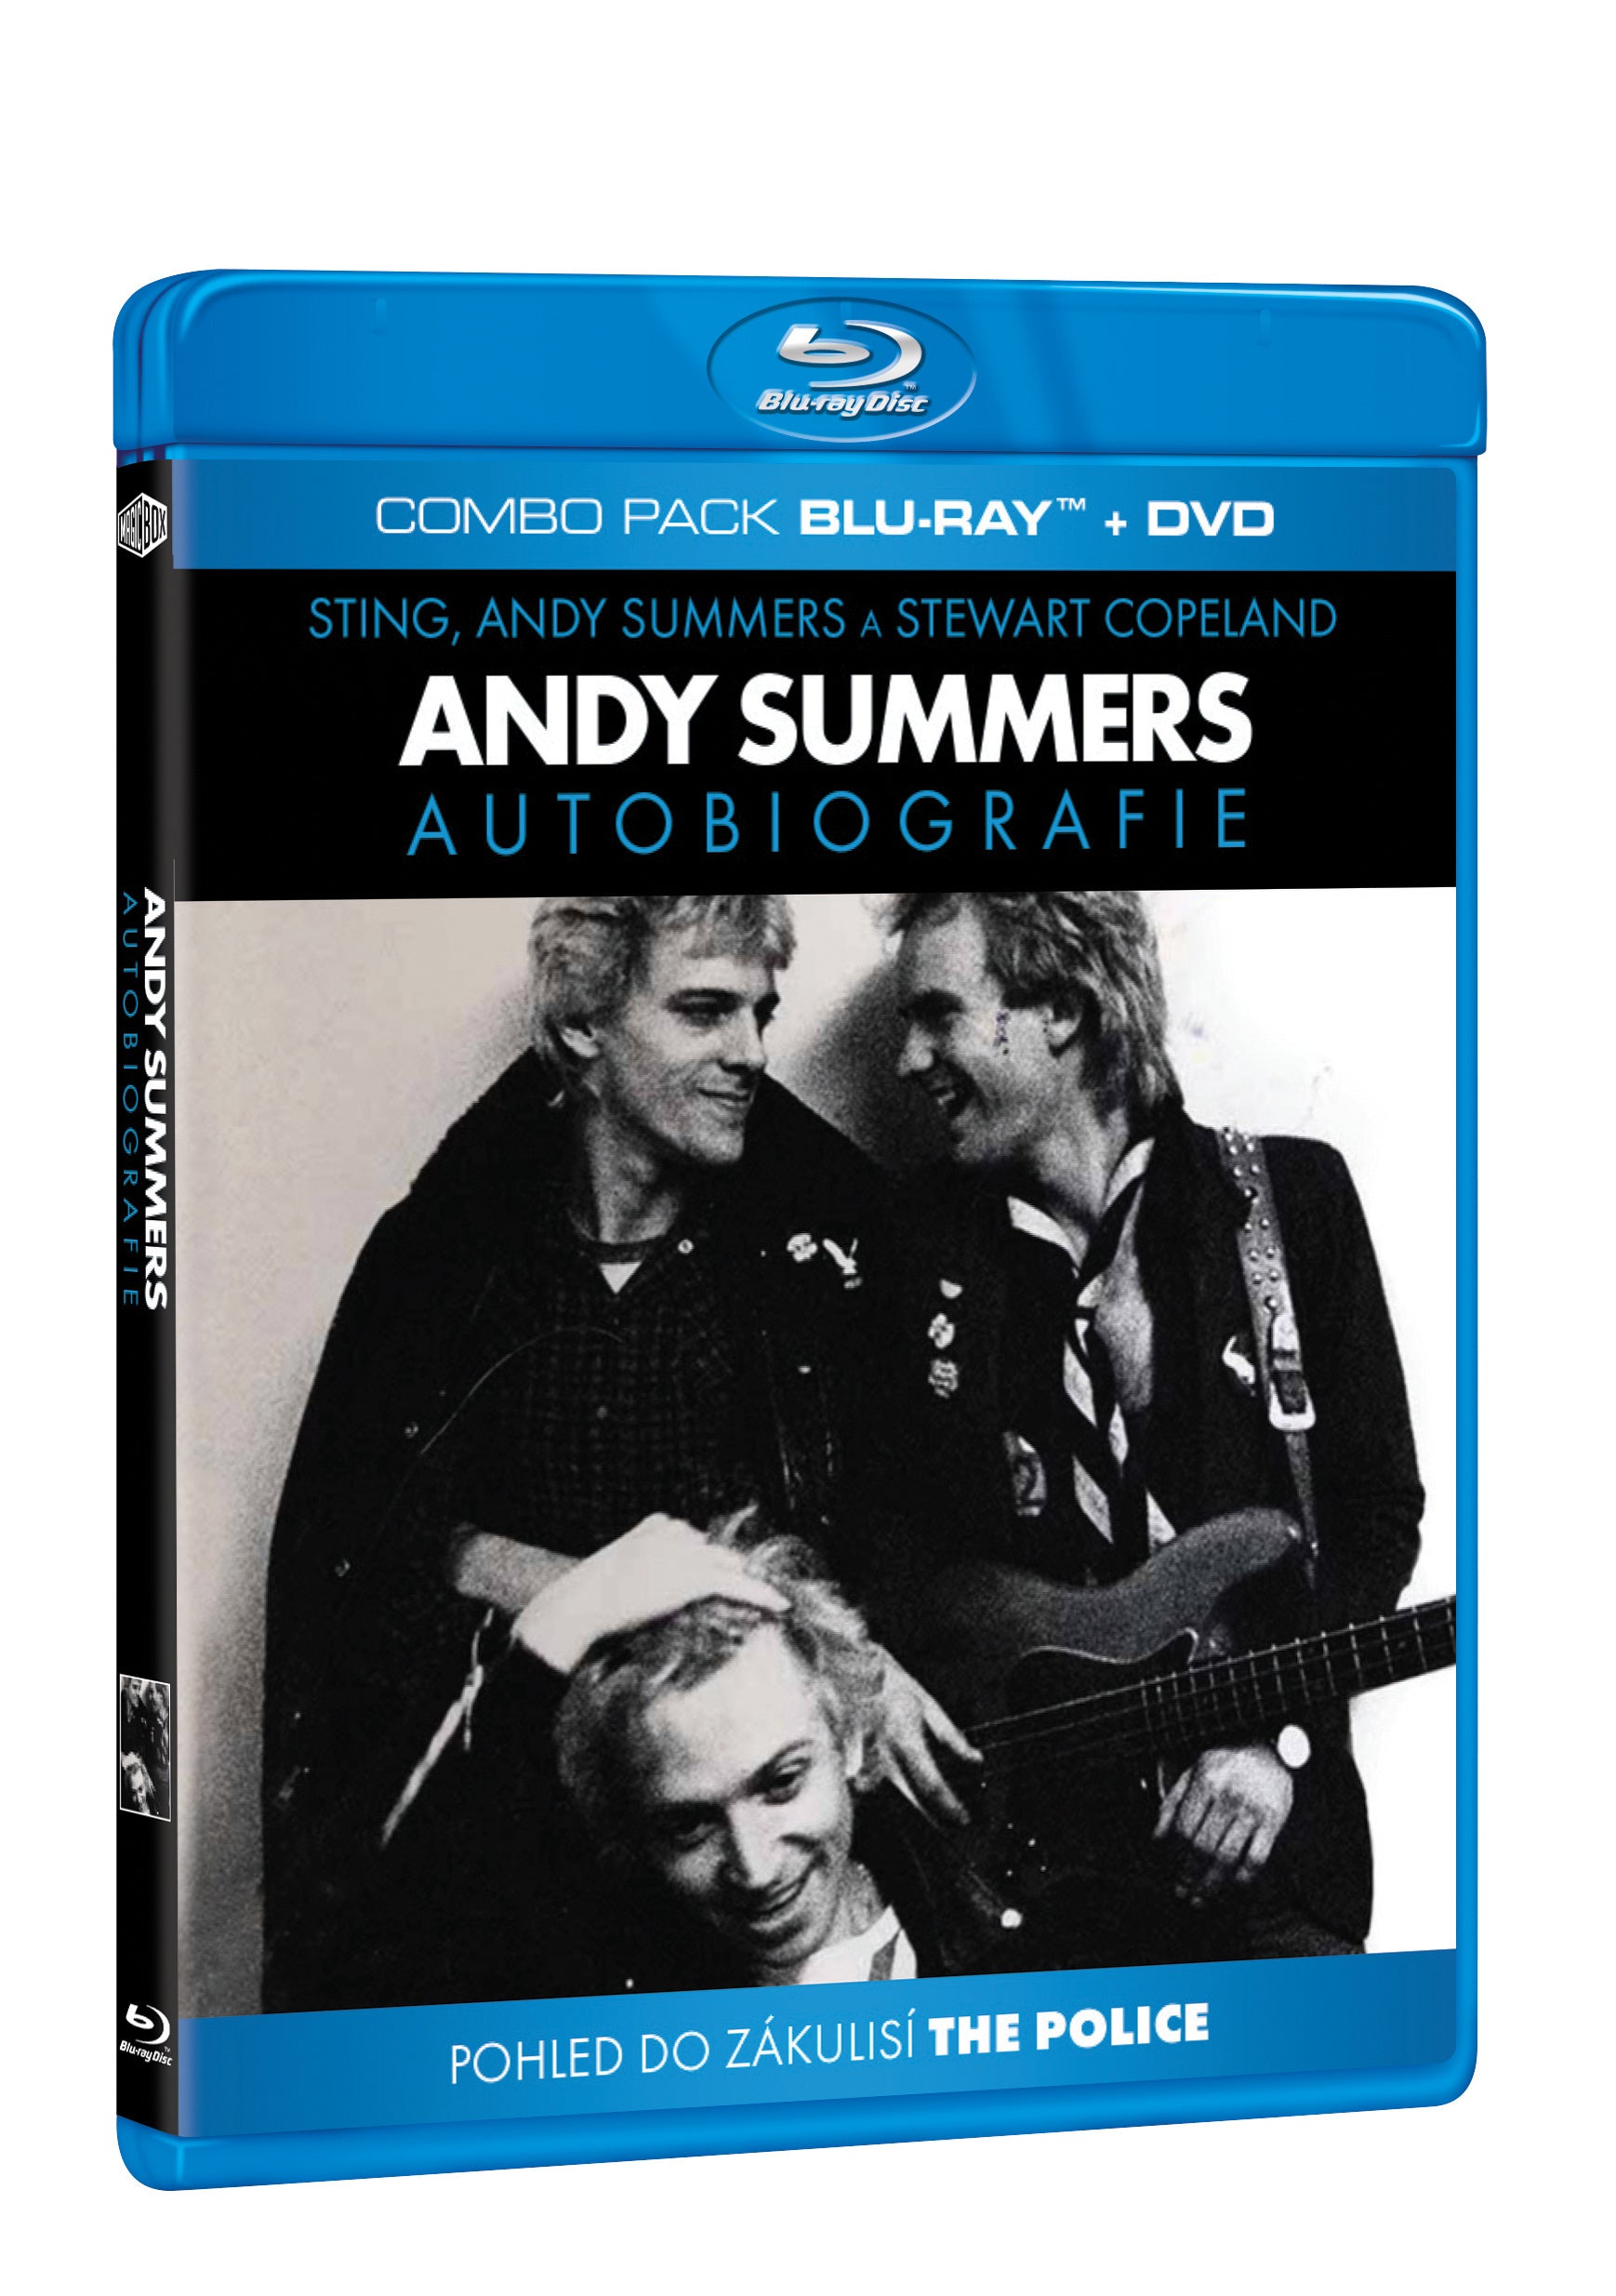 ANDY SUMMERS - Autobiografie BD+DVD (Combo Pack) / One Train Later - Czech version